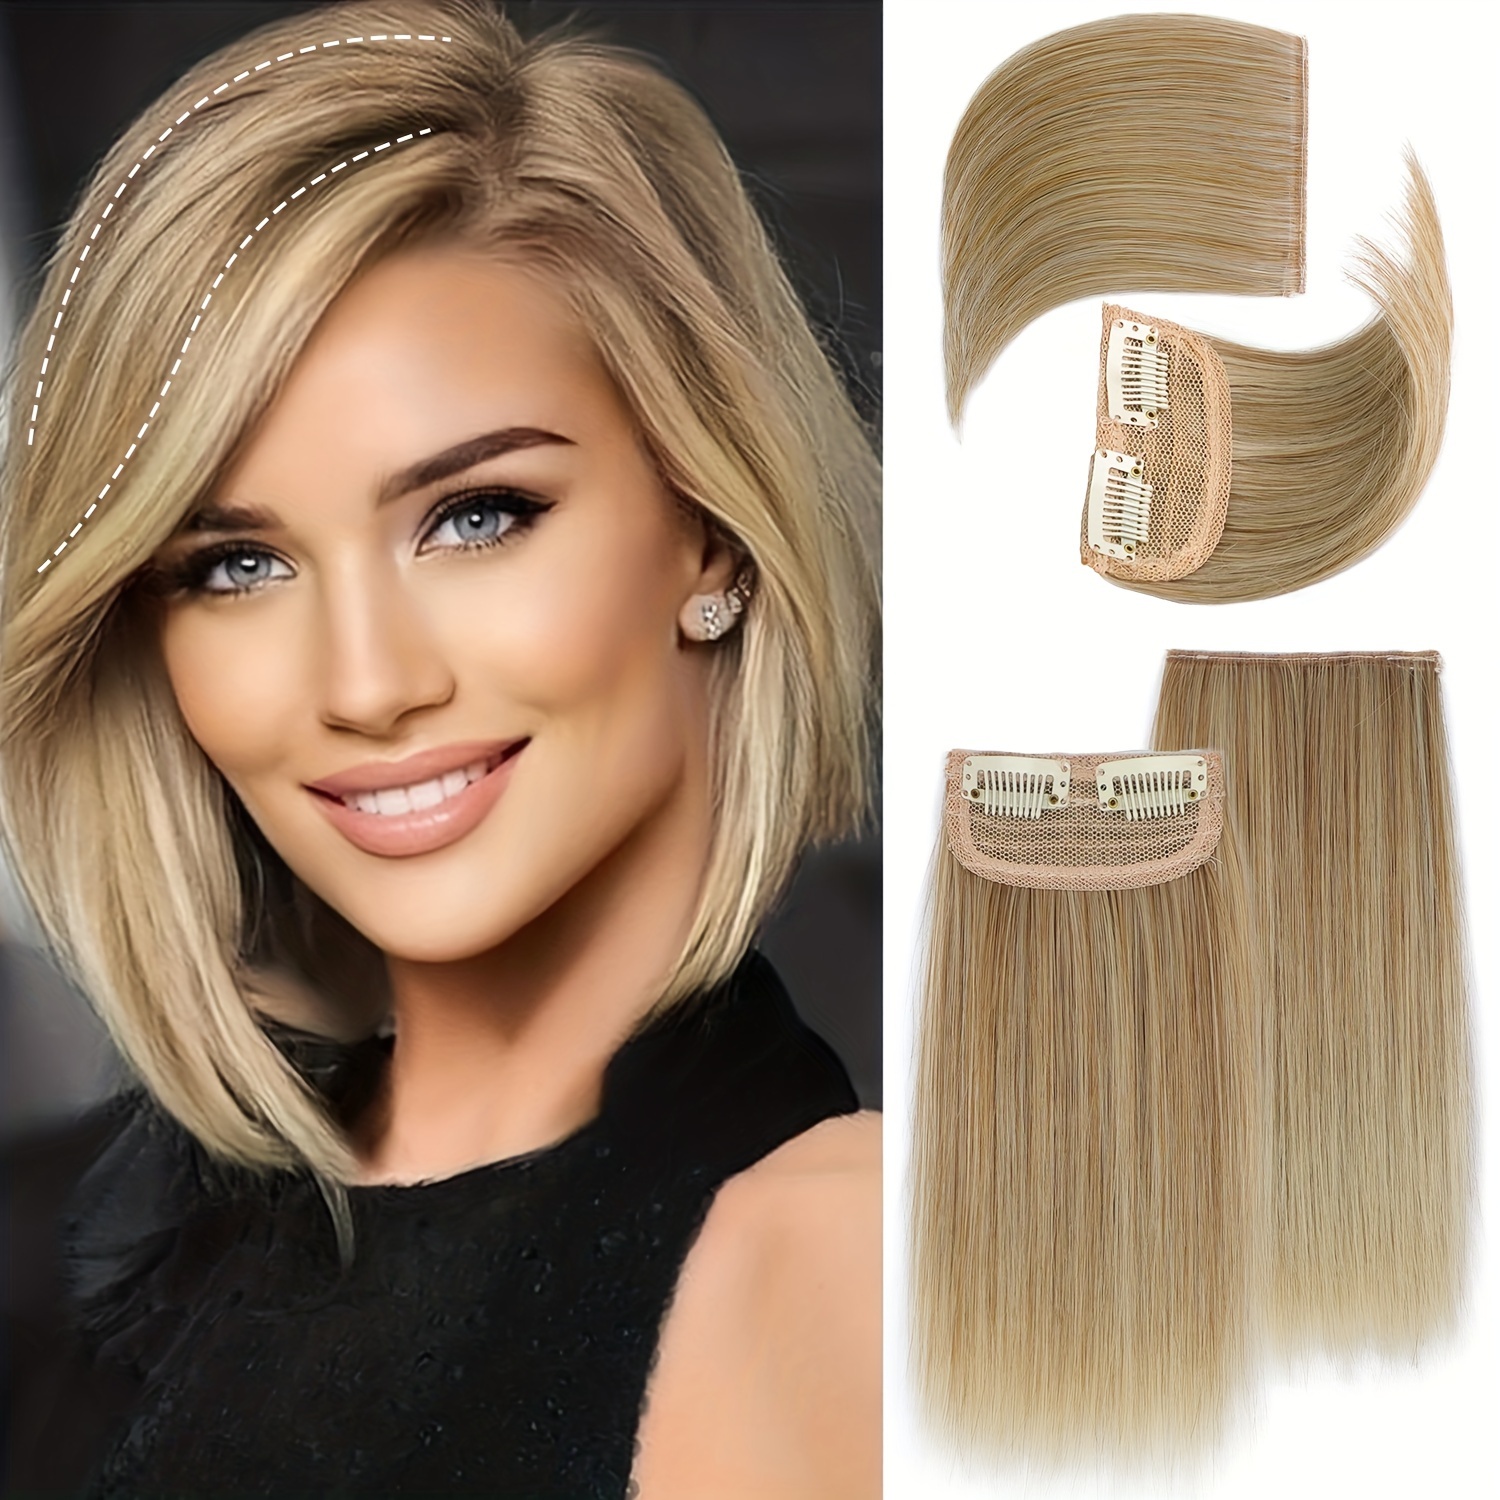 

4 Pcs Synthetic Clip In Hair Extension Blonde & Blond Mixed Hairpieces For Women Adding Hair Volume For Daily Use (double 4 Inch And Double 8 Inch)